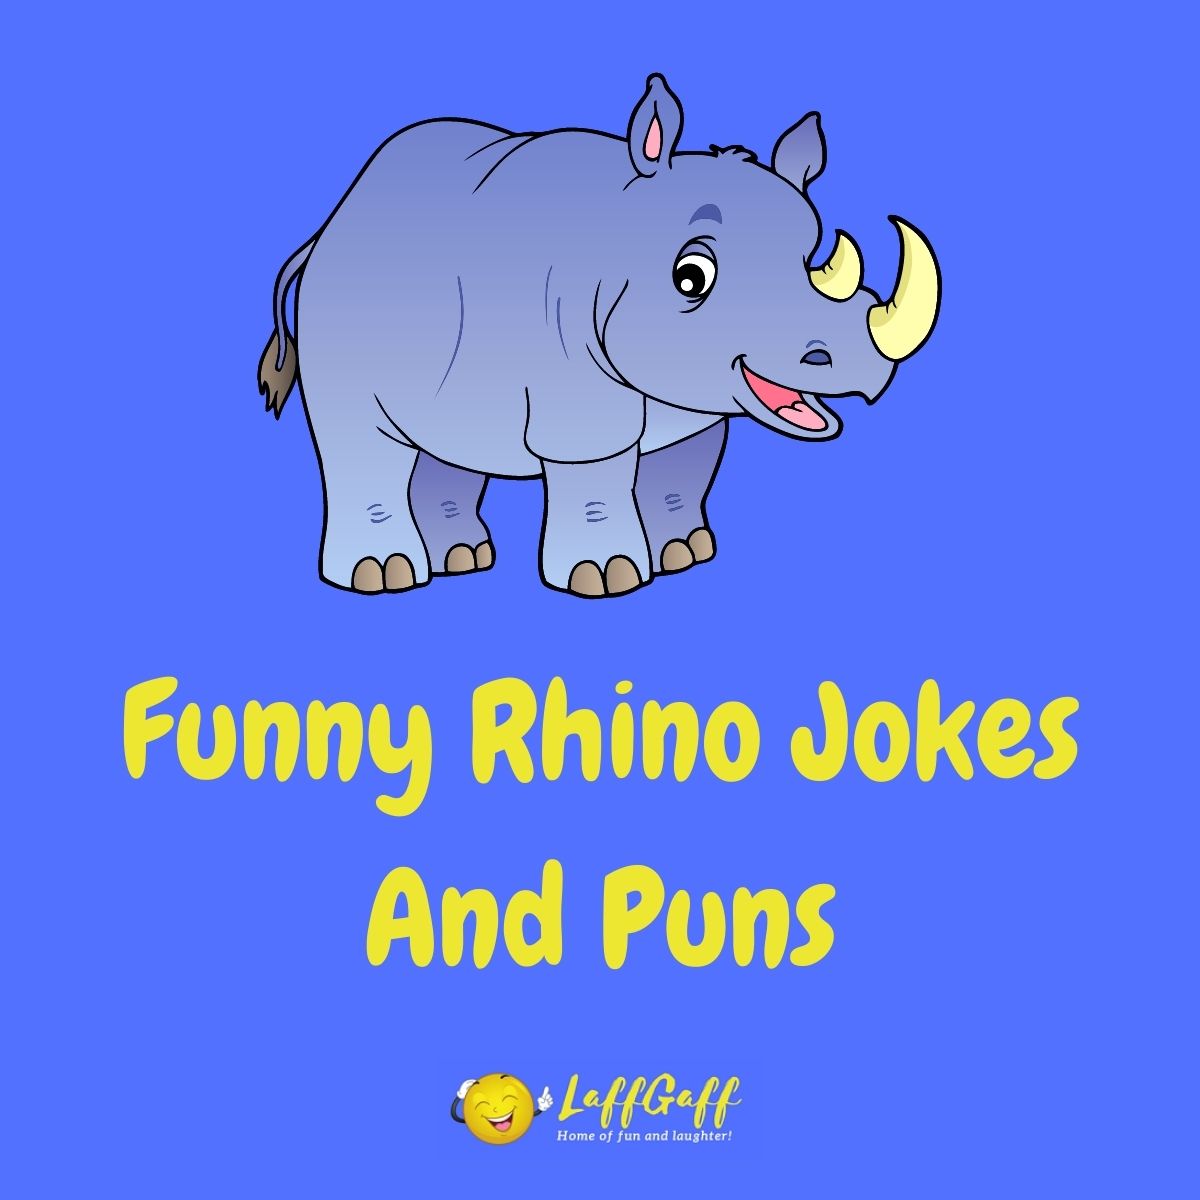 Featured image for a page of funny rhino jokes and puns.